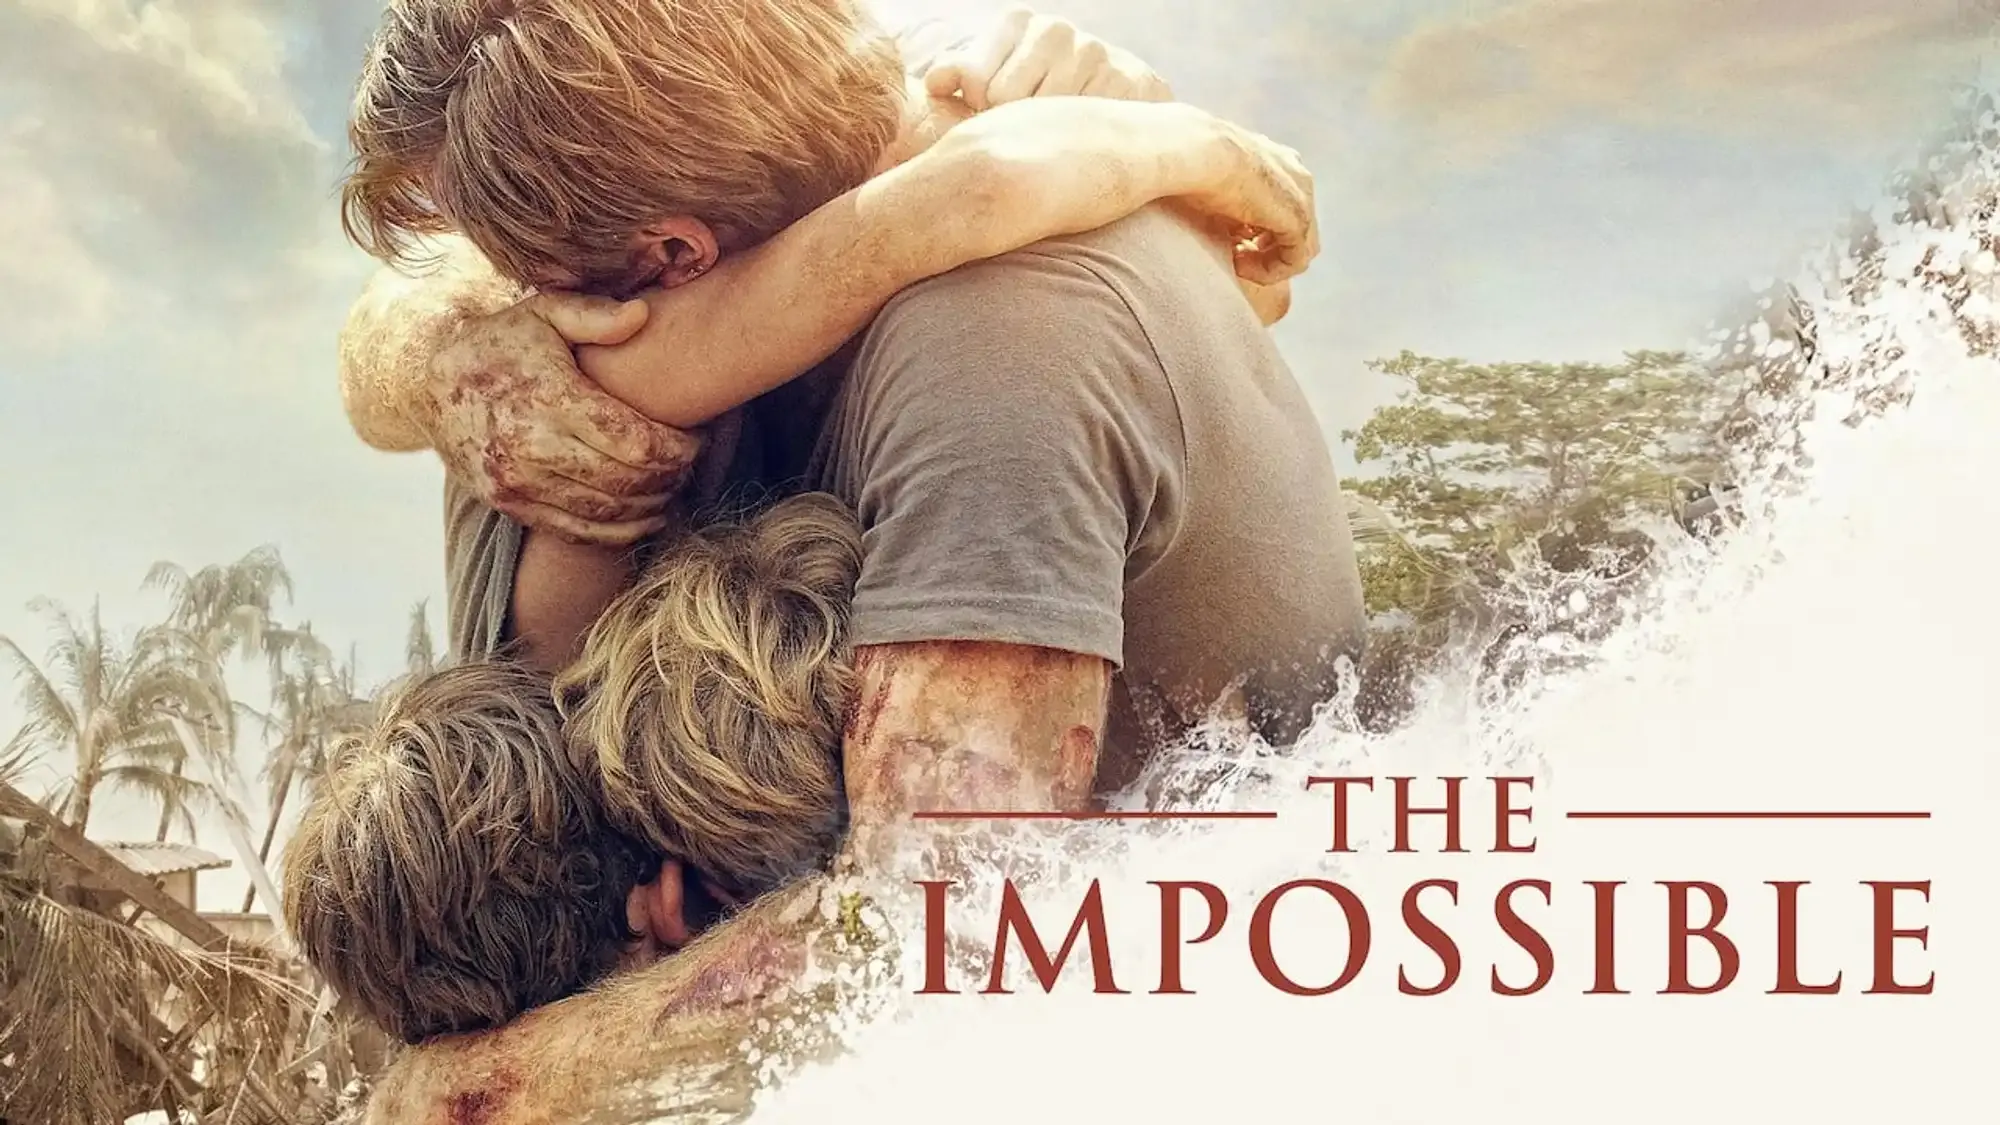 The Impossible movie review